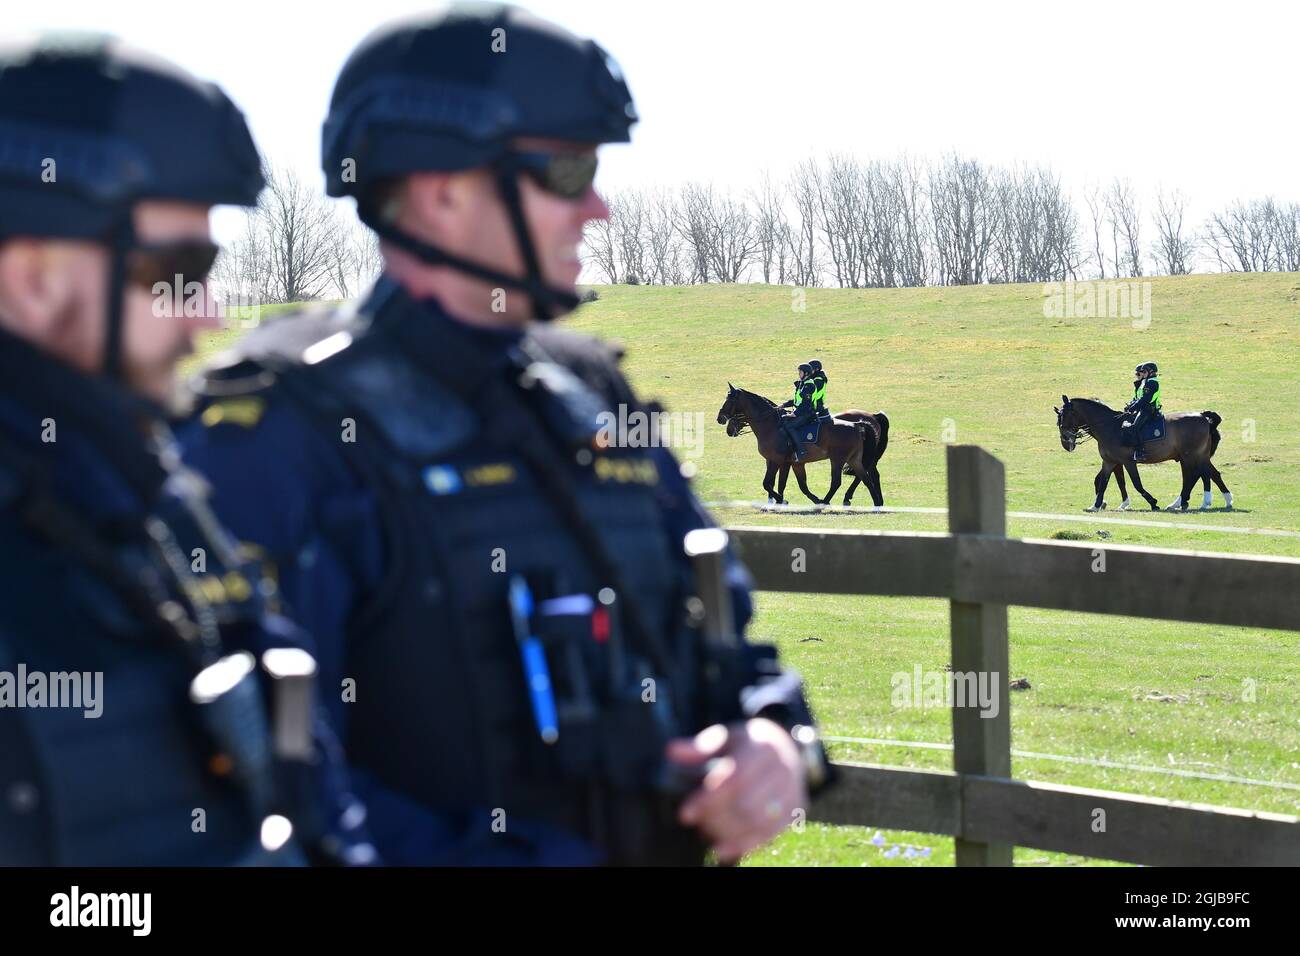 Mounted police patrol the area prior to the arrrival of UN Secretary-General Antonio Guterres and the Security Council at Backakra outside Ystad, southern Sweden on April 21, 2018. The meeting on Syria will take place at Backakra, the estate of Dag Hammarskjold who served as UN Secretary-General from 1953 until his death in a plane crash in September 1961. Photo: Johan Nilsson / TT / 50090  Stock Photo